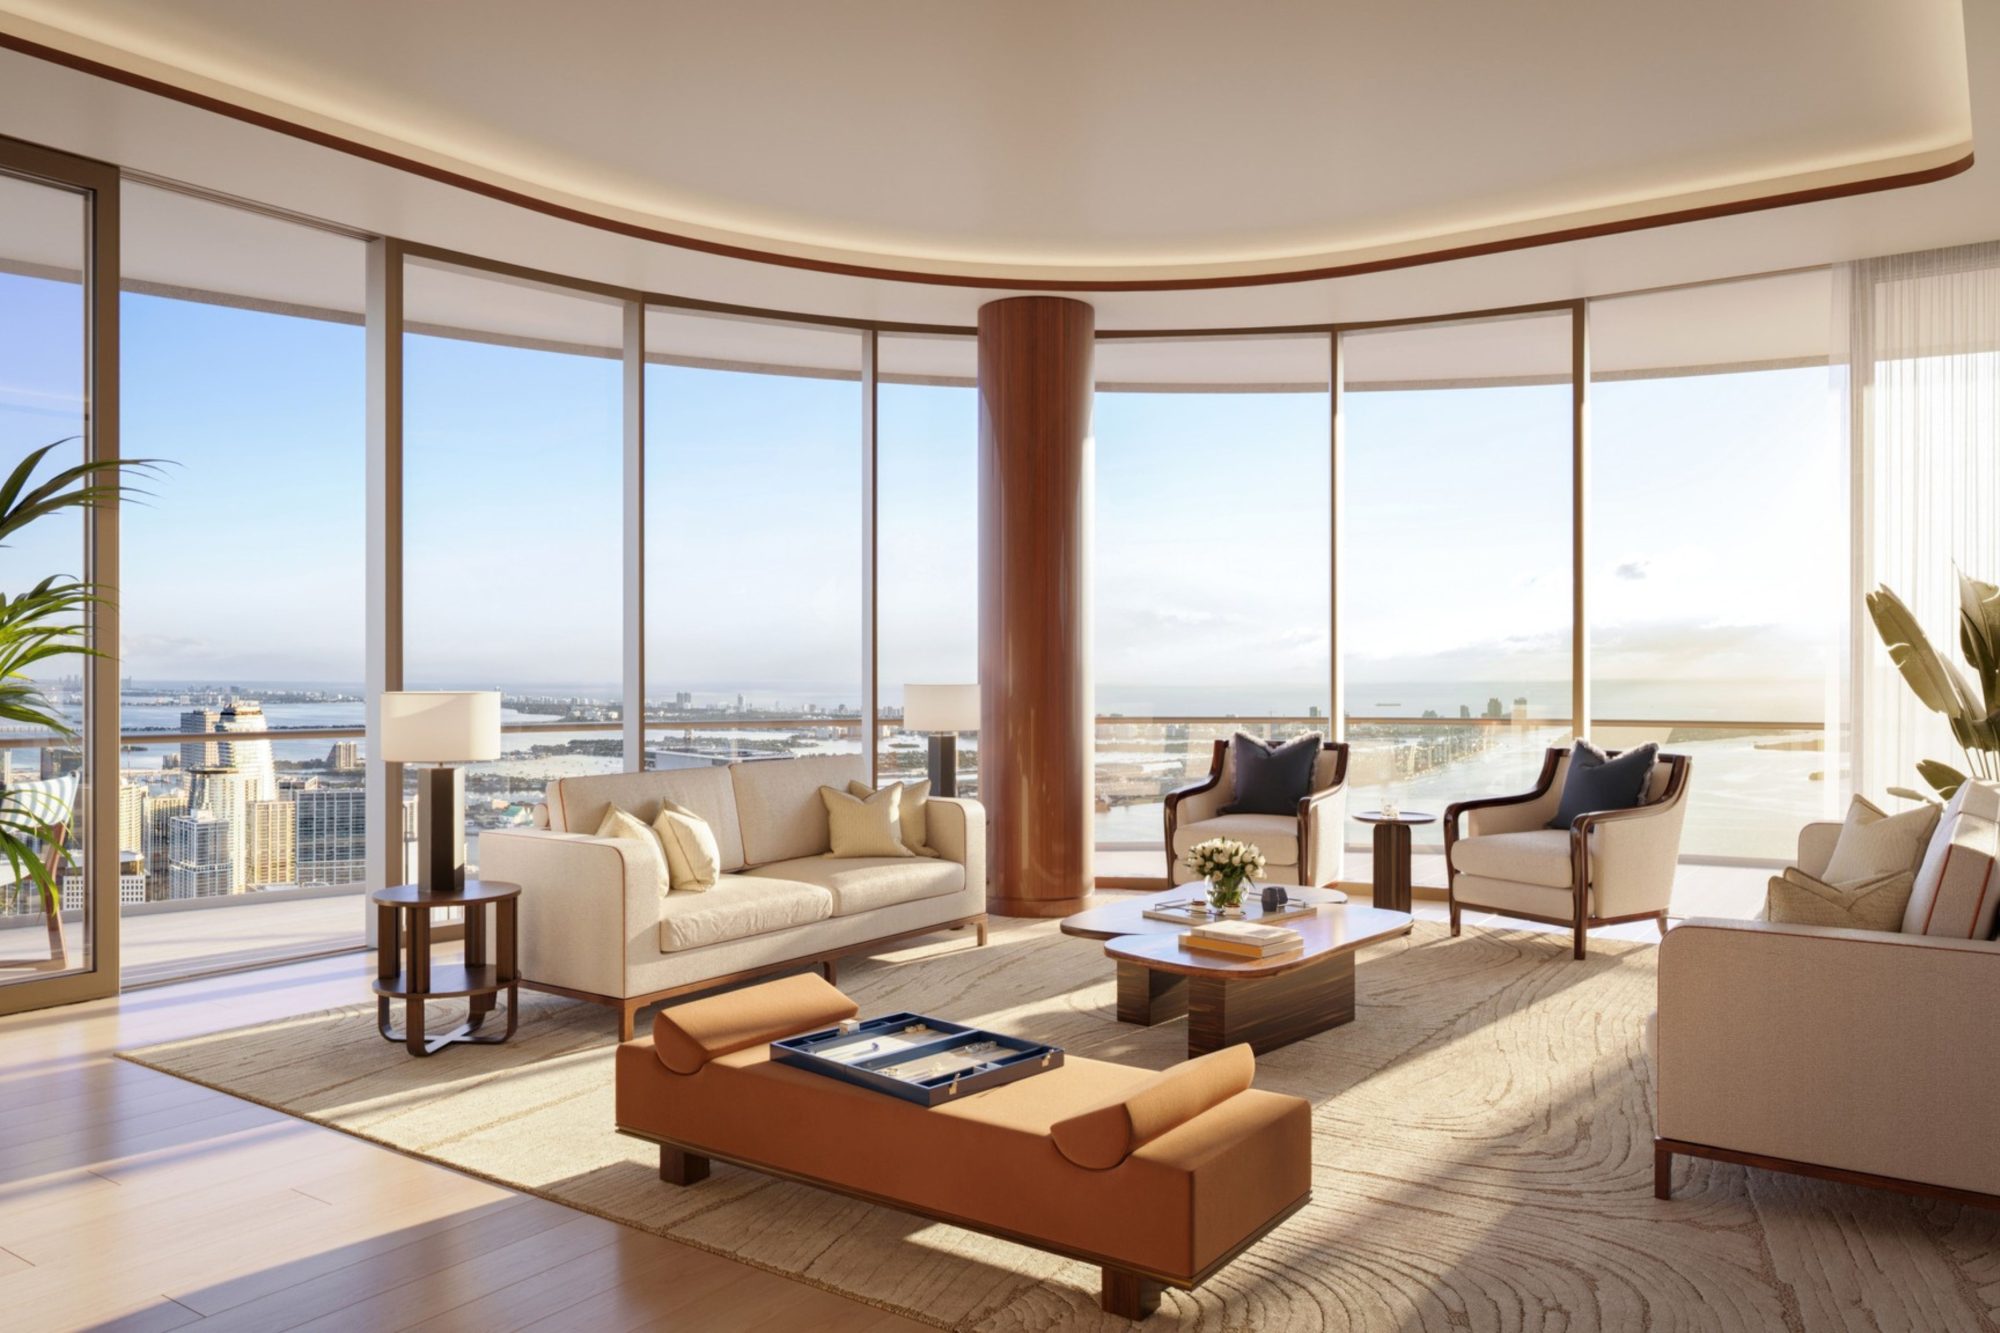 Cipriani Residences Miami introduces the exquisite Canaletto Collection